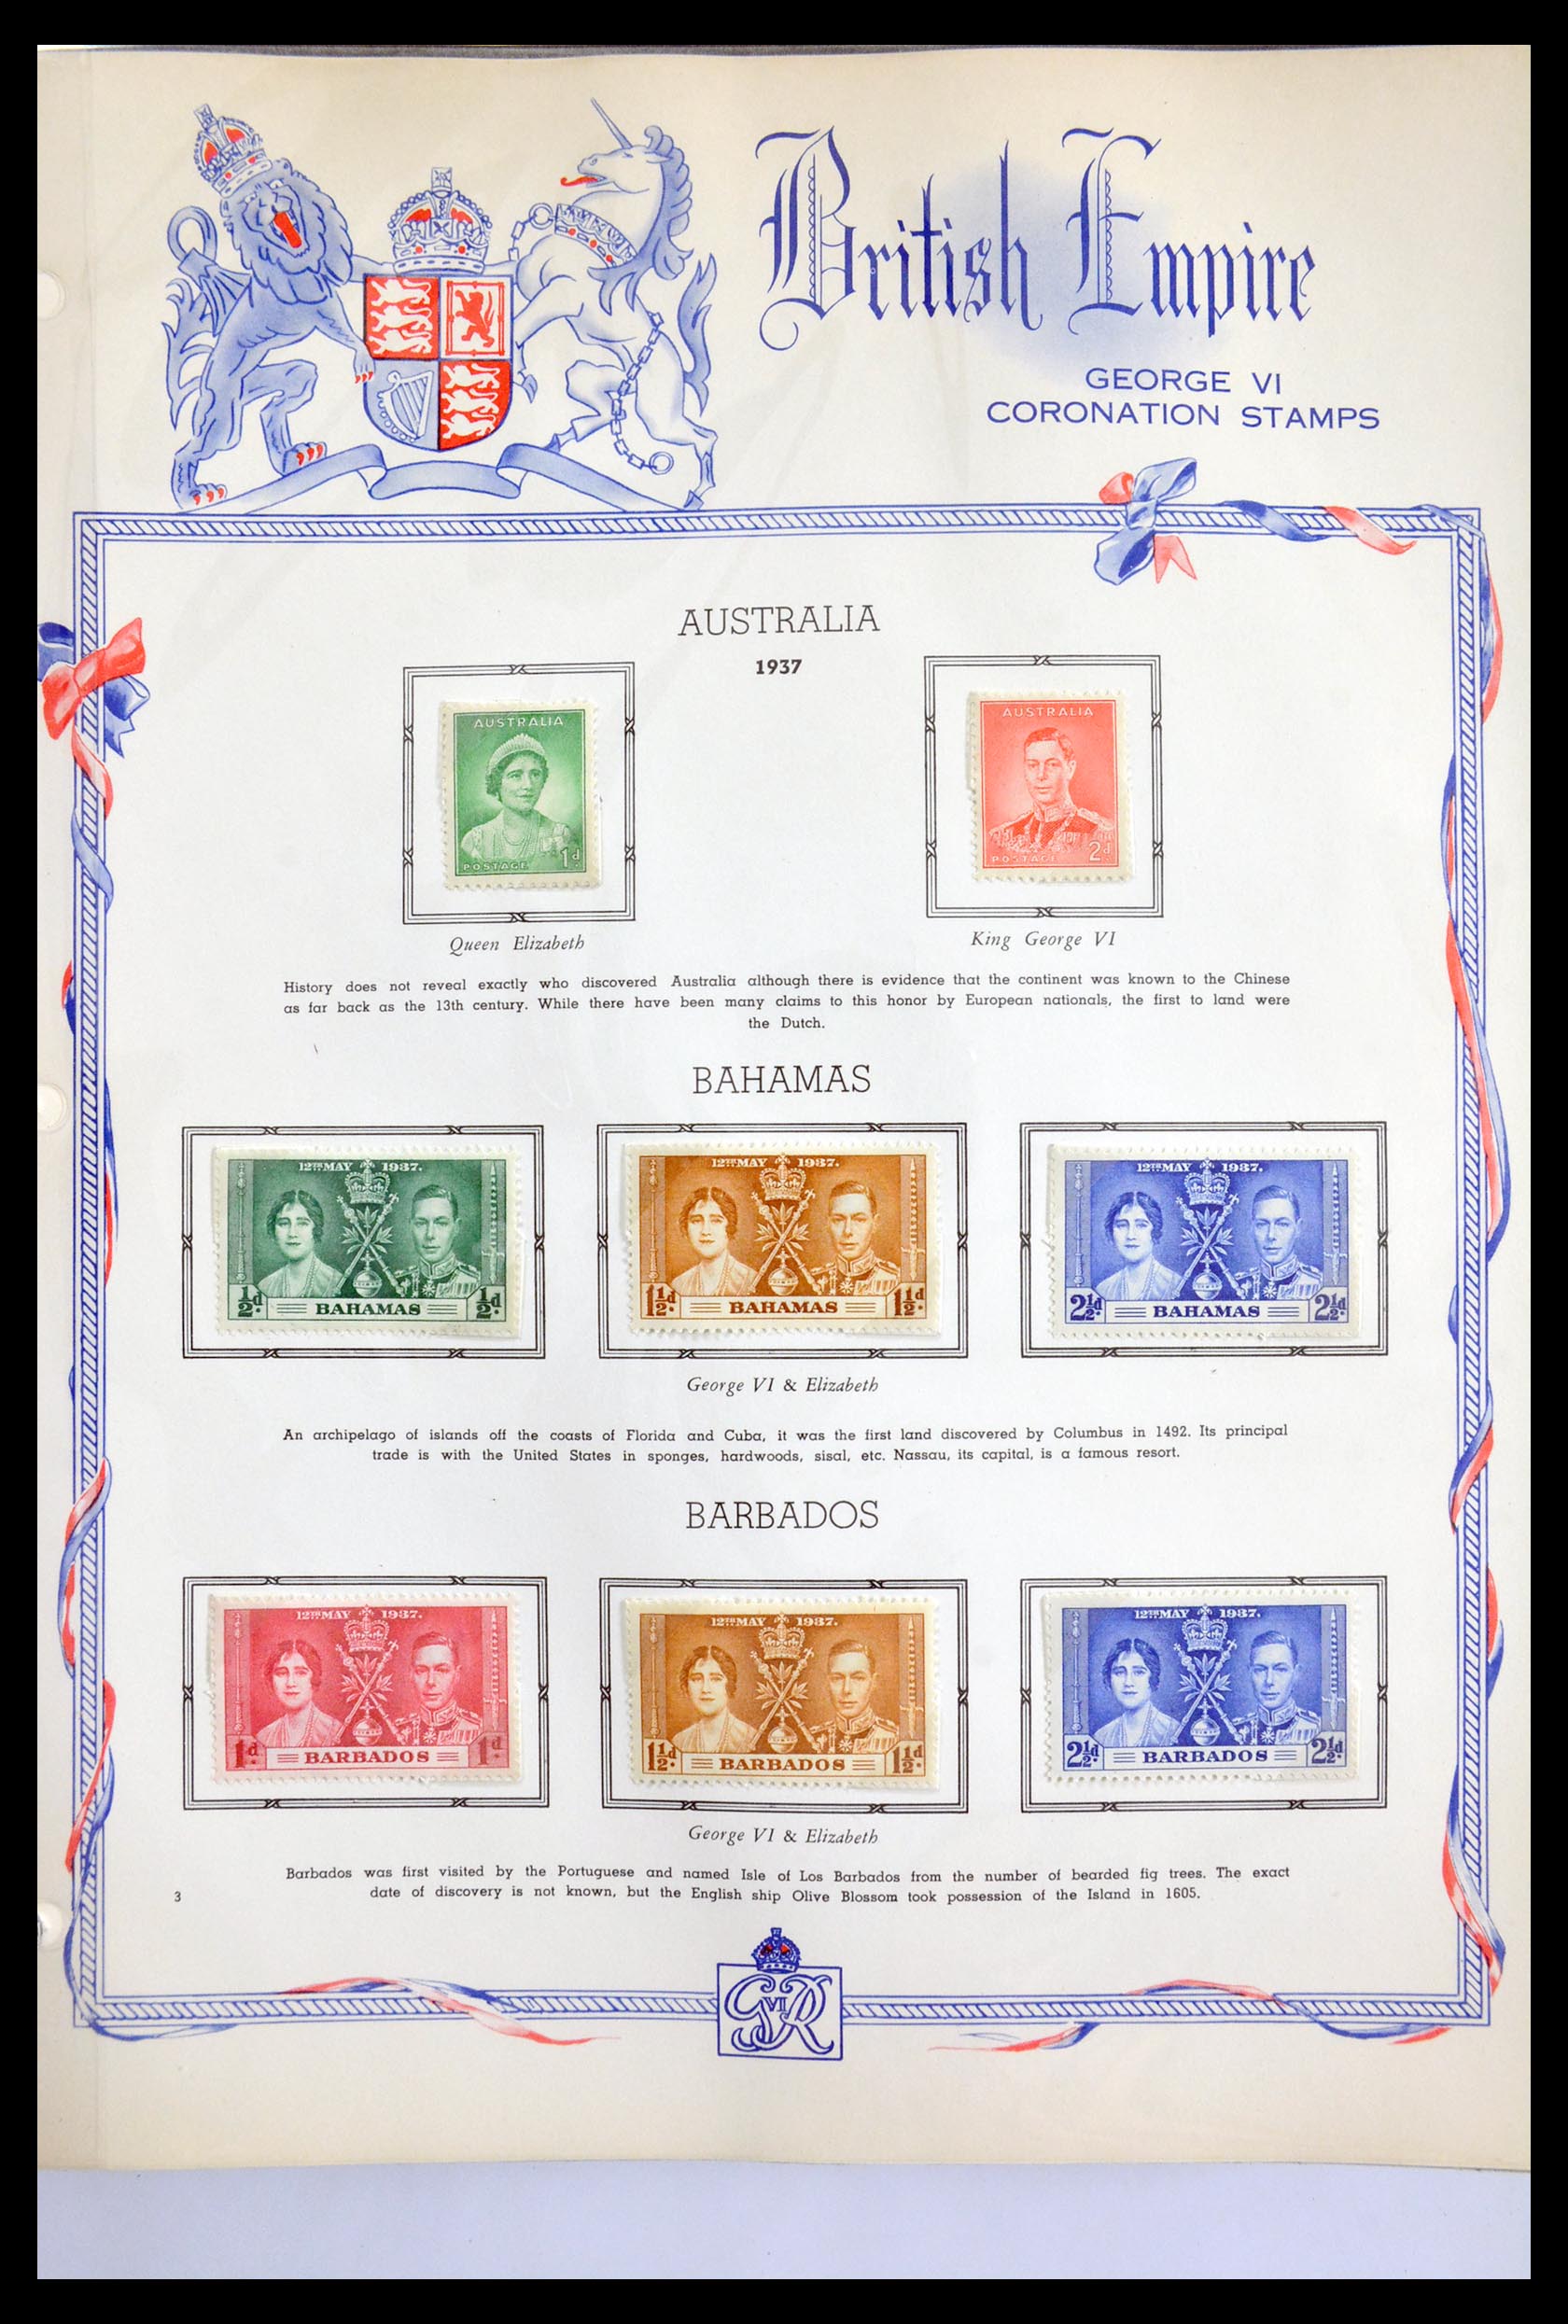 29940 003 - 29940 Great Britain and Colonies 1920-1970.